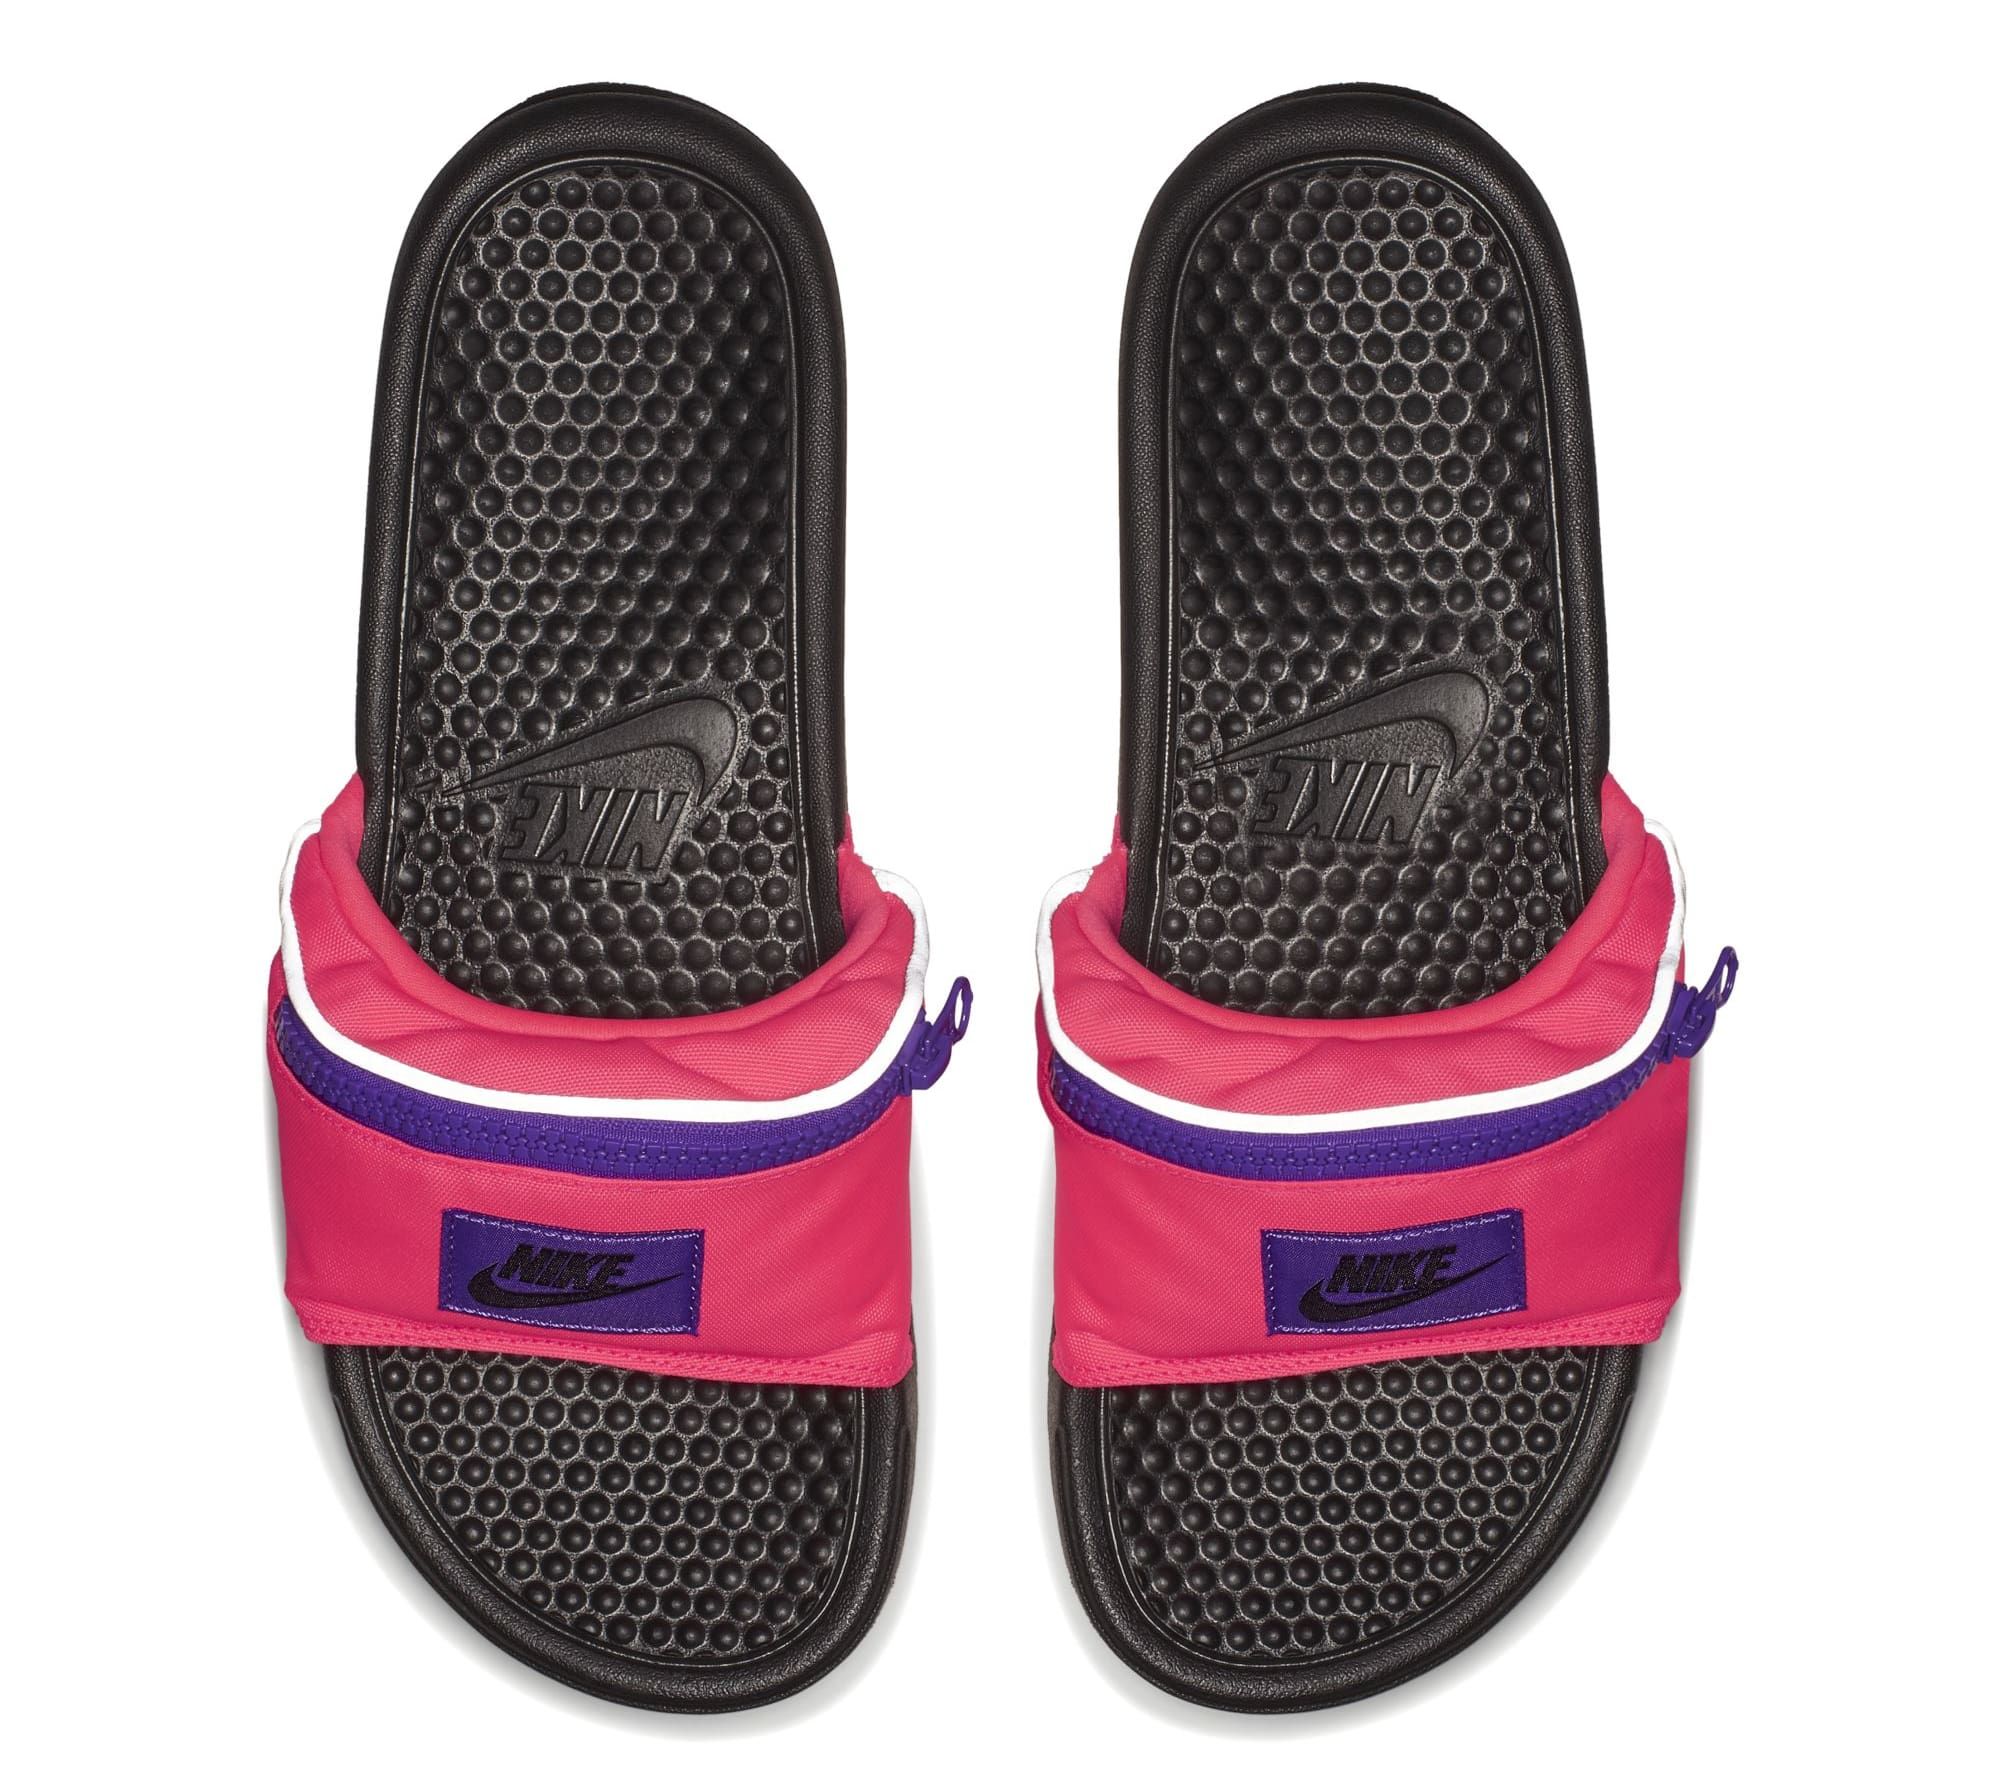 Nike Slides Are the Summer Sandals a Man Ask For